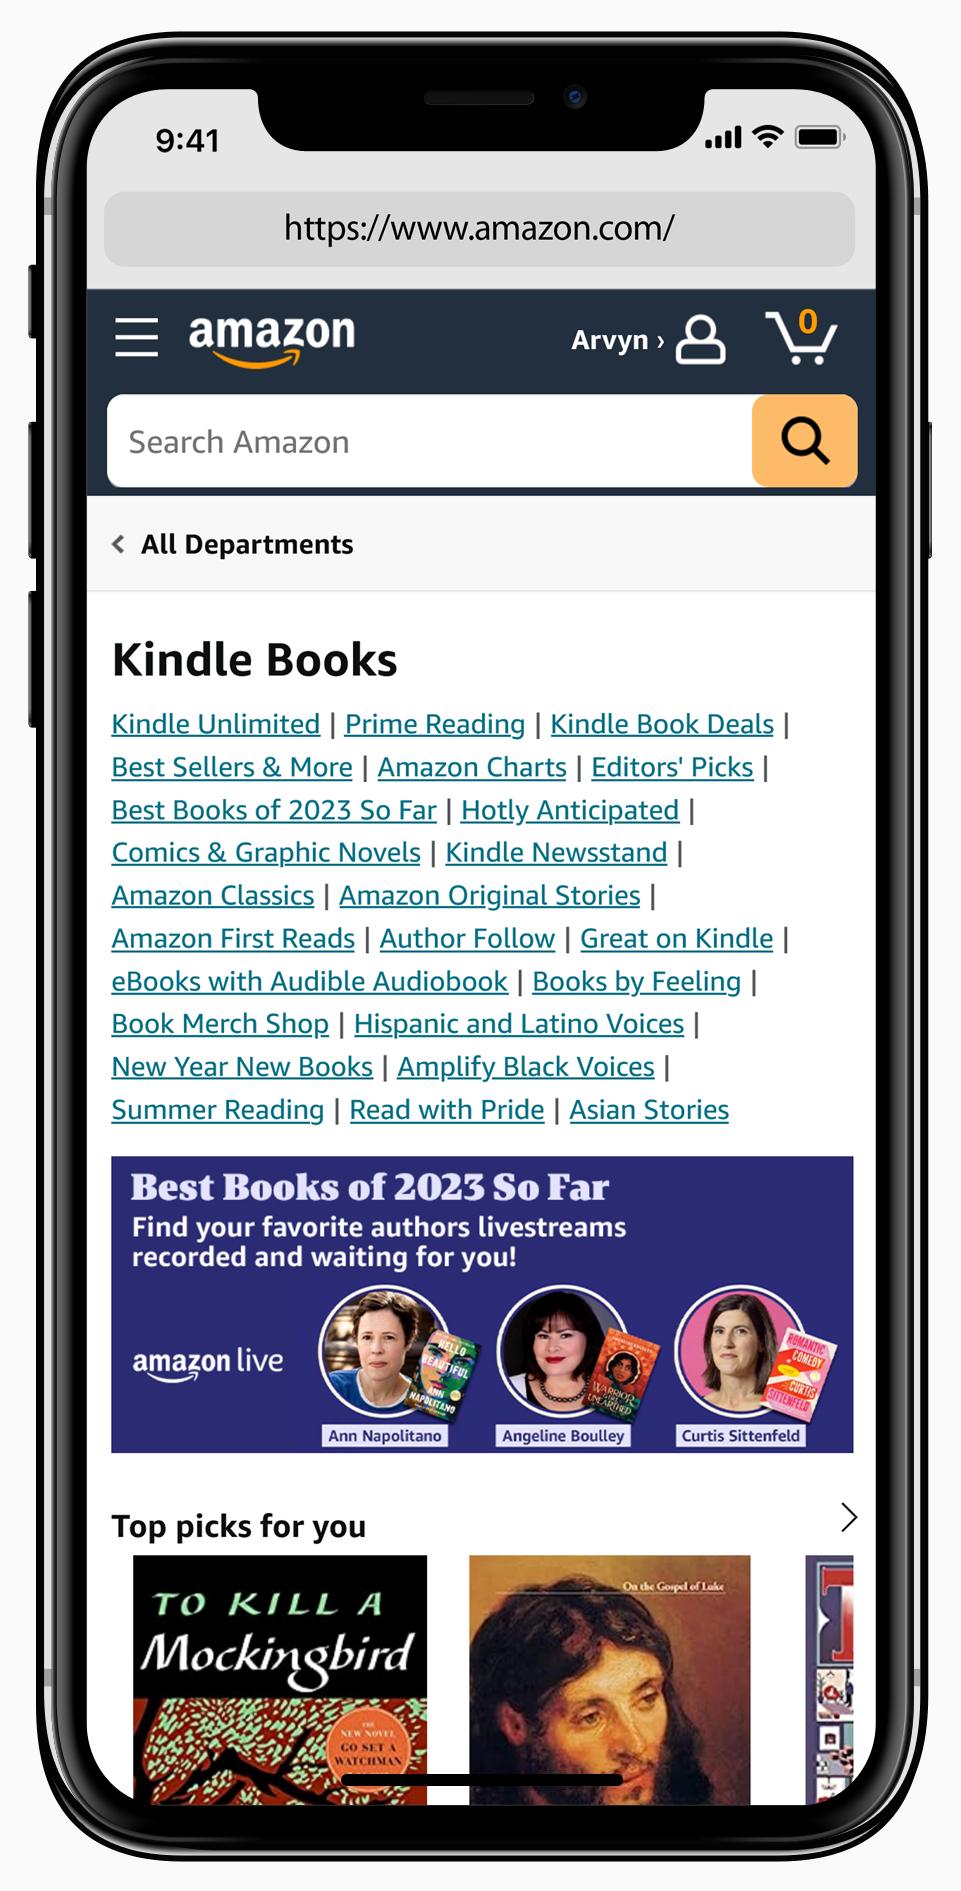 Amazon Kindle Store Home Page on an iPhone